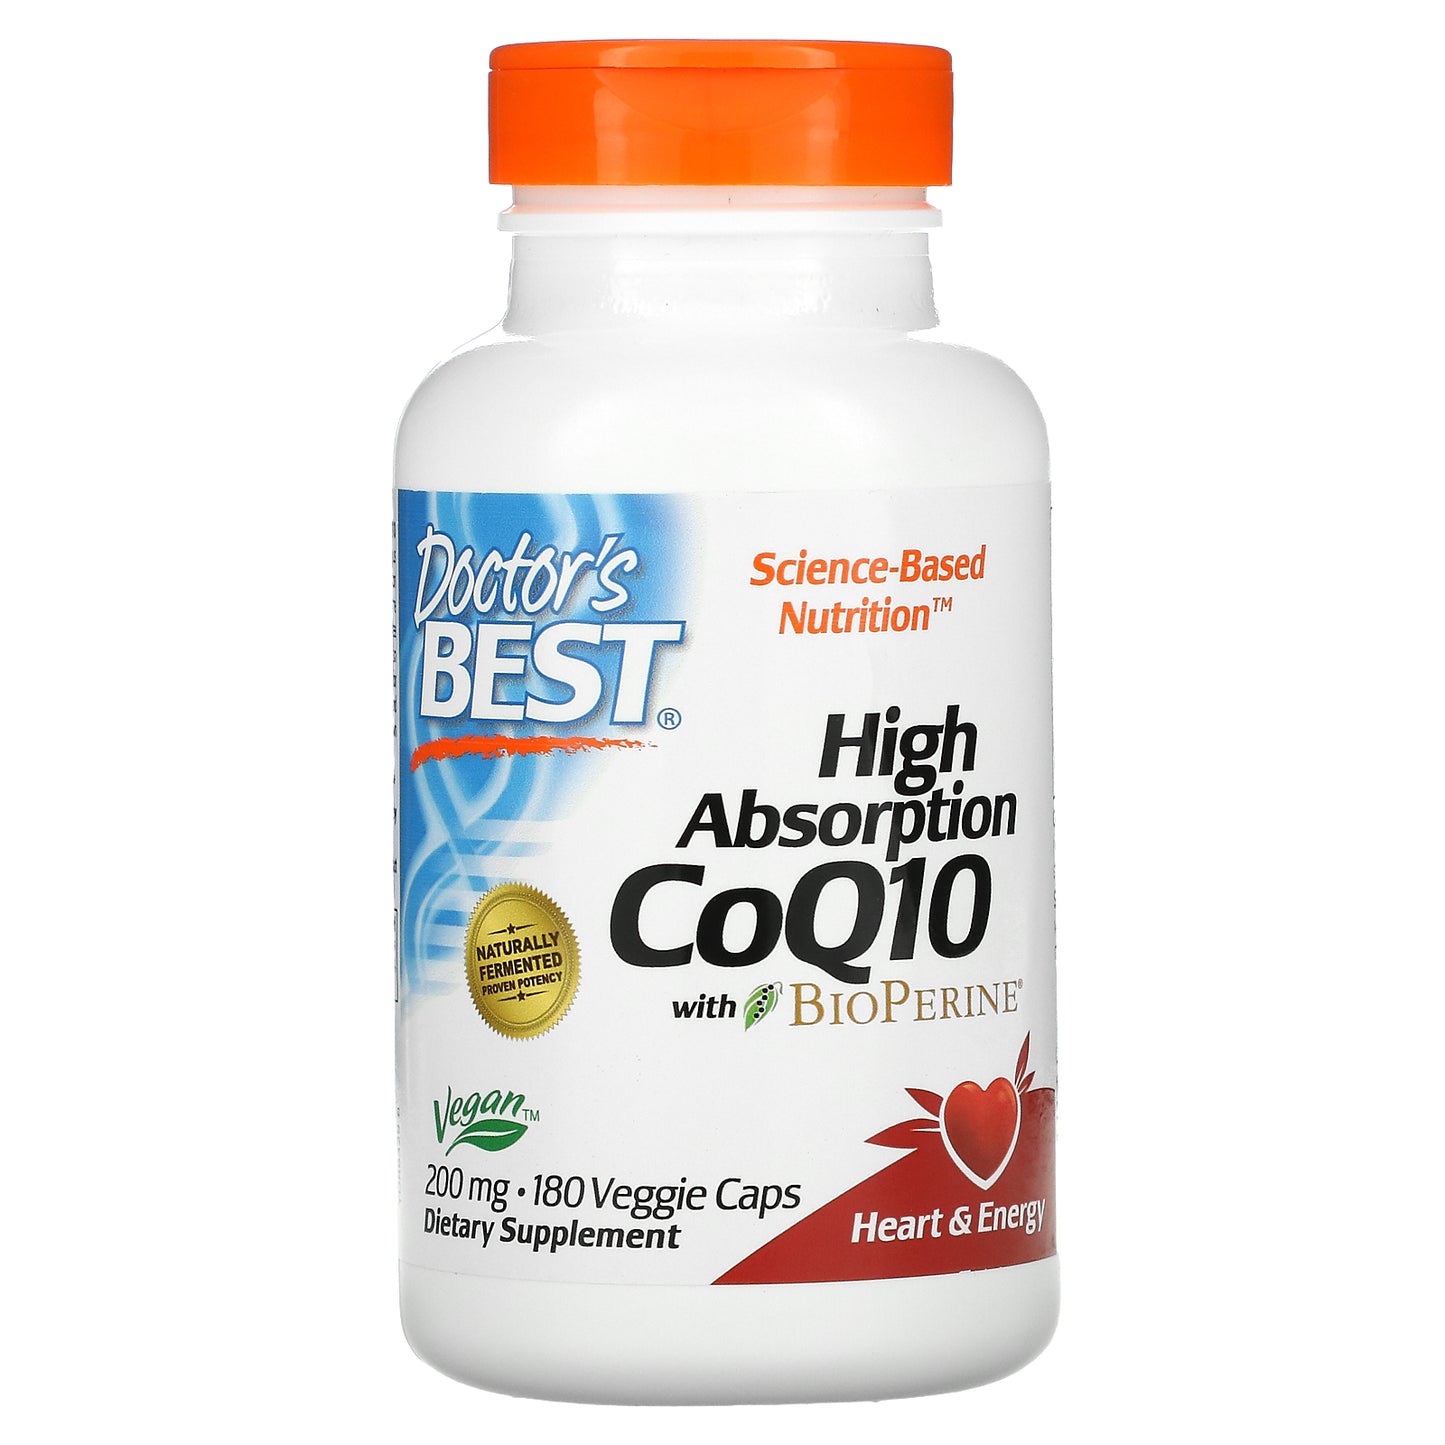 Doctor's Best High Absorption CoQ10 with BioPerine, 200 mg, 180 Veggie Caps